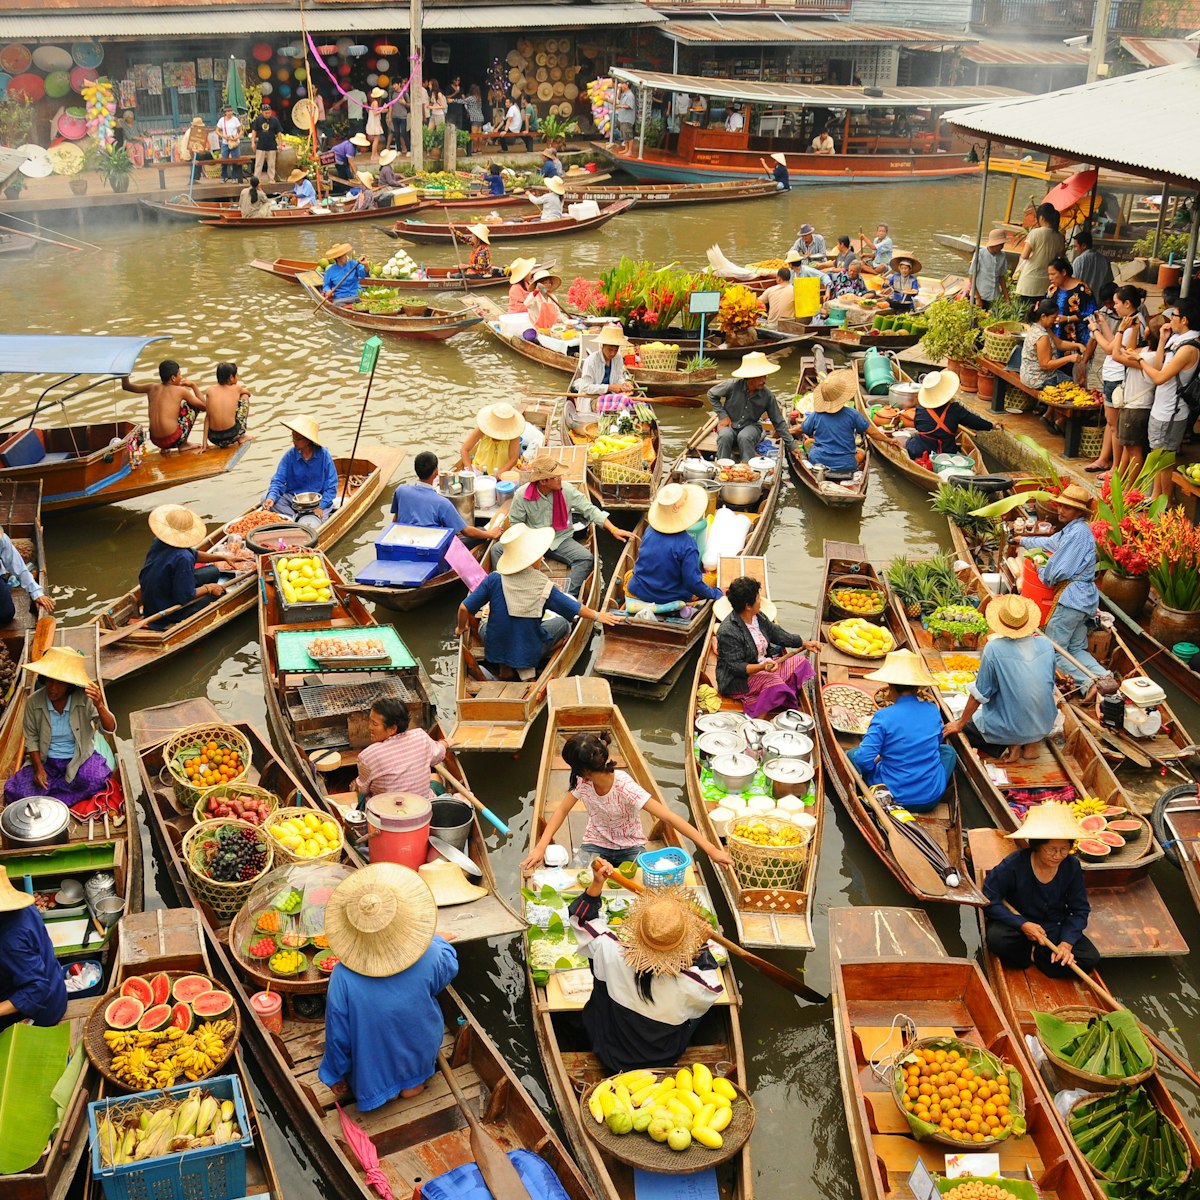 Wooden boats busy ferrying people at Amphawa floating market.